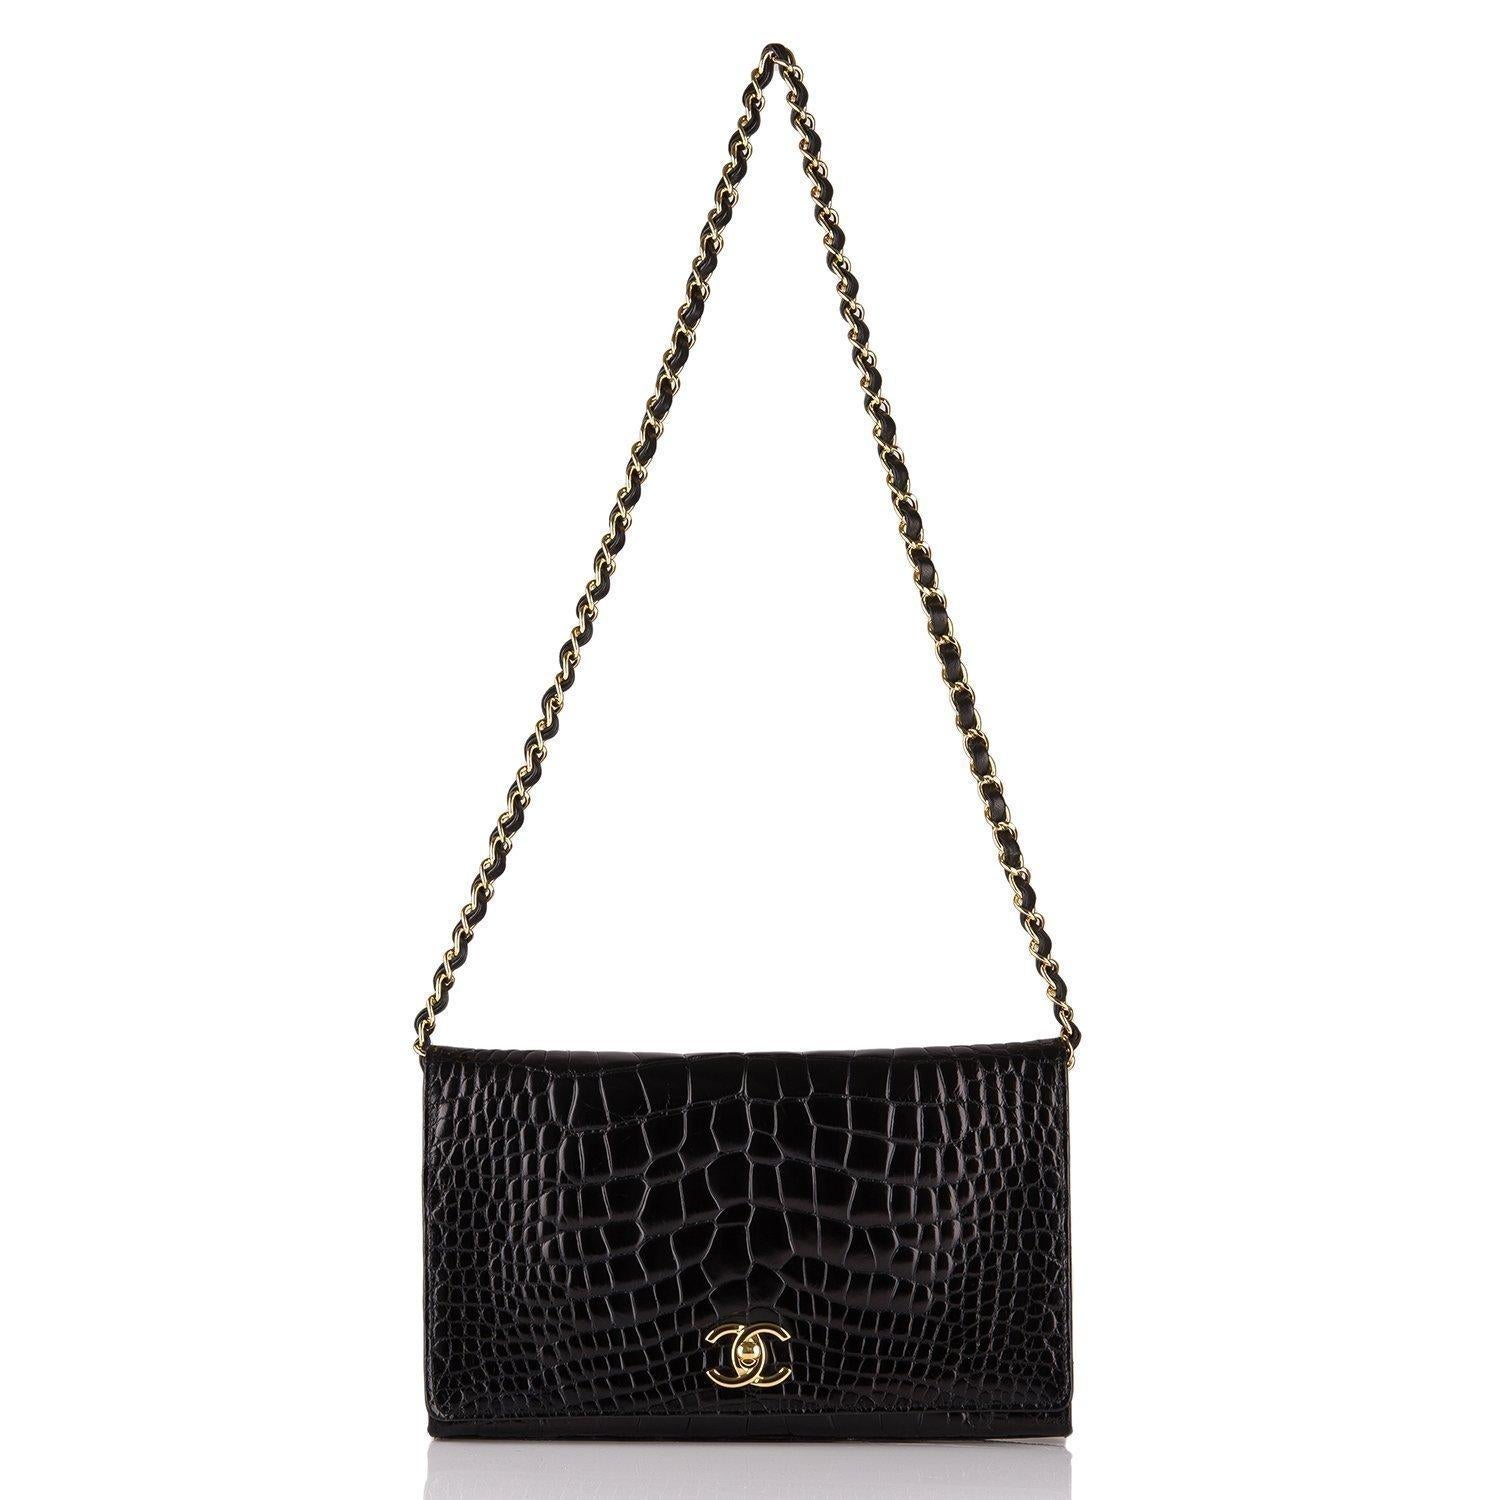 Chanel Rare Black Crocodile Leather Gold Evening 2 in 1 Clutch Shoulder Flap Bag

Crocodile 
Gold tone hardware
Leather lining
Made in France
Strap drop 11